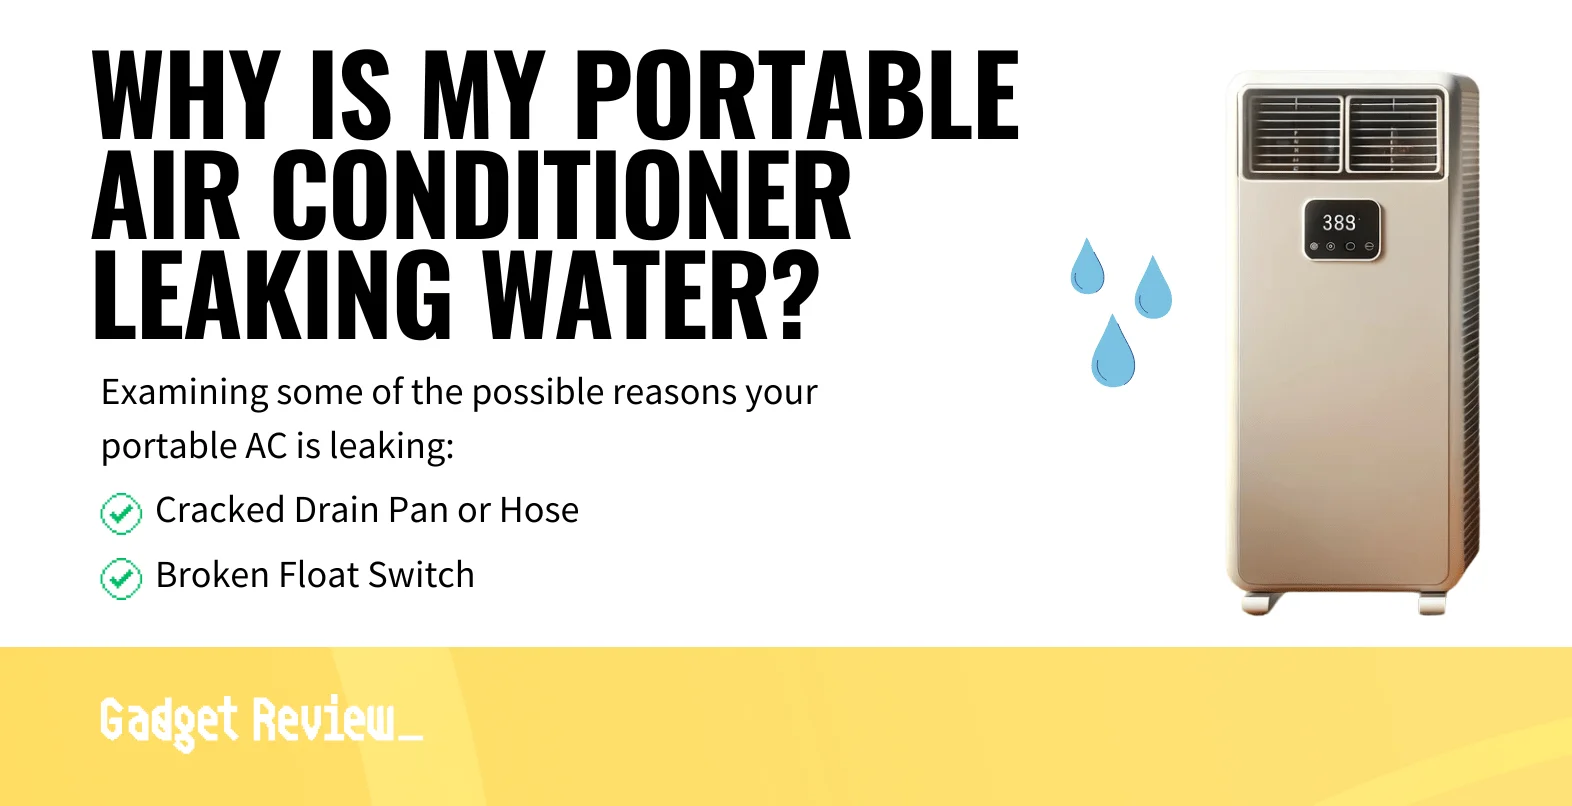 Why Is My Portable Air Conditioner Leaking Water?